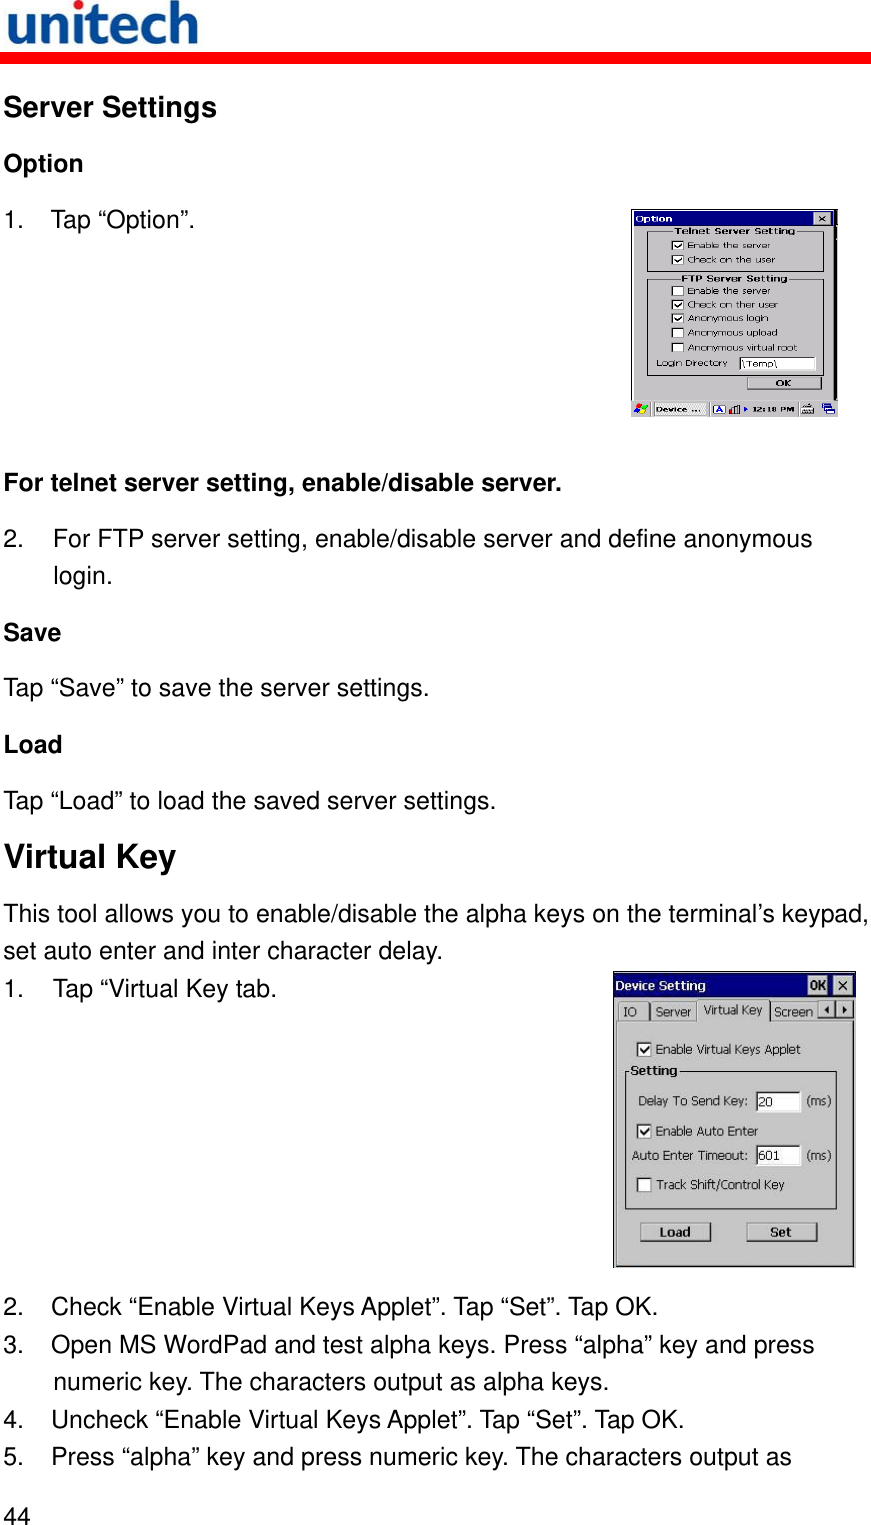   44  Server Settings Option 1. Tap “Option”.  For telnet server setting, enable/disable server. 2.  For FTP server setting, enable/disable server and define anonymous login. Save Tap “Save” to save the server settings. Load Tap “Load” to load the saved server settings. Virtual Key This tool allows you to enable/disable the alpha keys on the terminal’s keypad, set auto enter and inter character delay. 1.  Tap “Virtual Key tab. 2.  Check “Enable Virtual Keys Applet”. Tap “Set”. Tap OK. 3.  Open MS WordPad and test alpha keys. Press “alpha” key and press numeric key. The characters output as alpha keys. 4.  Uncheck “Enable Virtual Keys Applet”. Tap “Set”. Tap OK. 5.  Press “alpha” key and press numeric key. The characters output as 